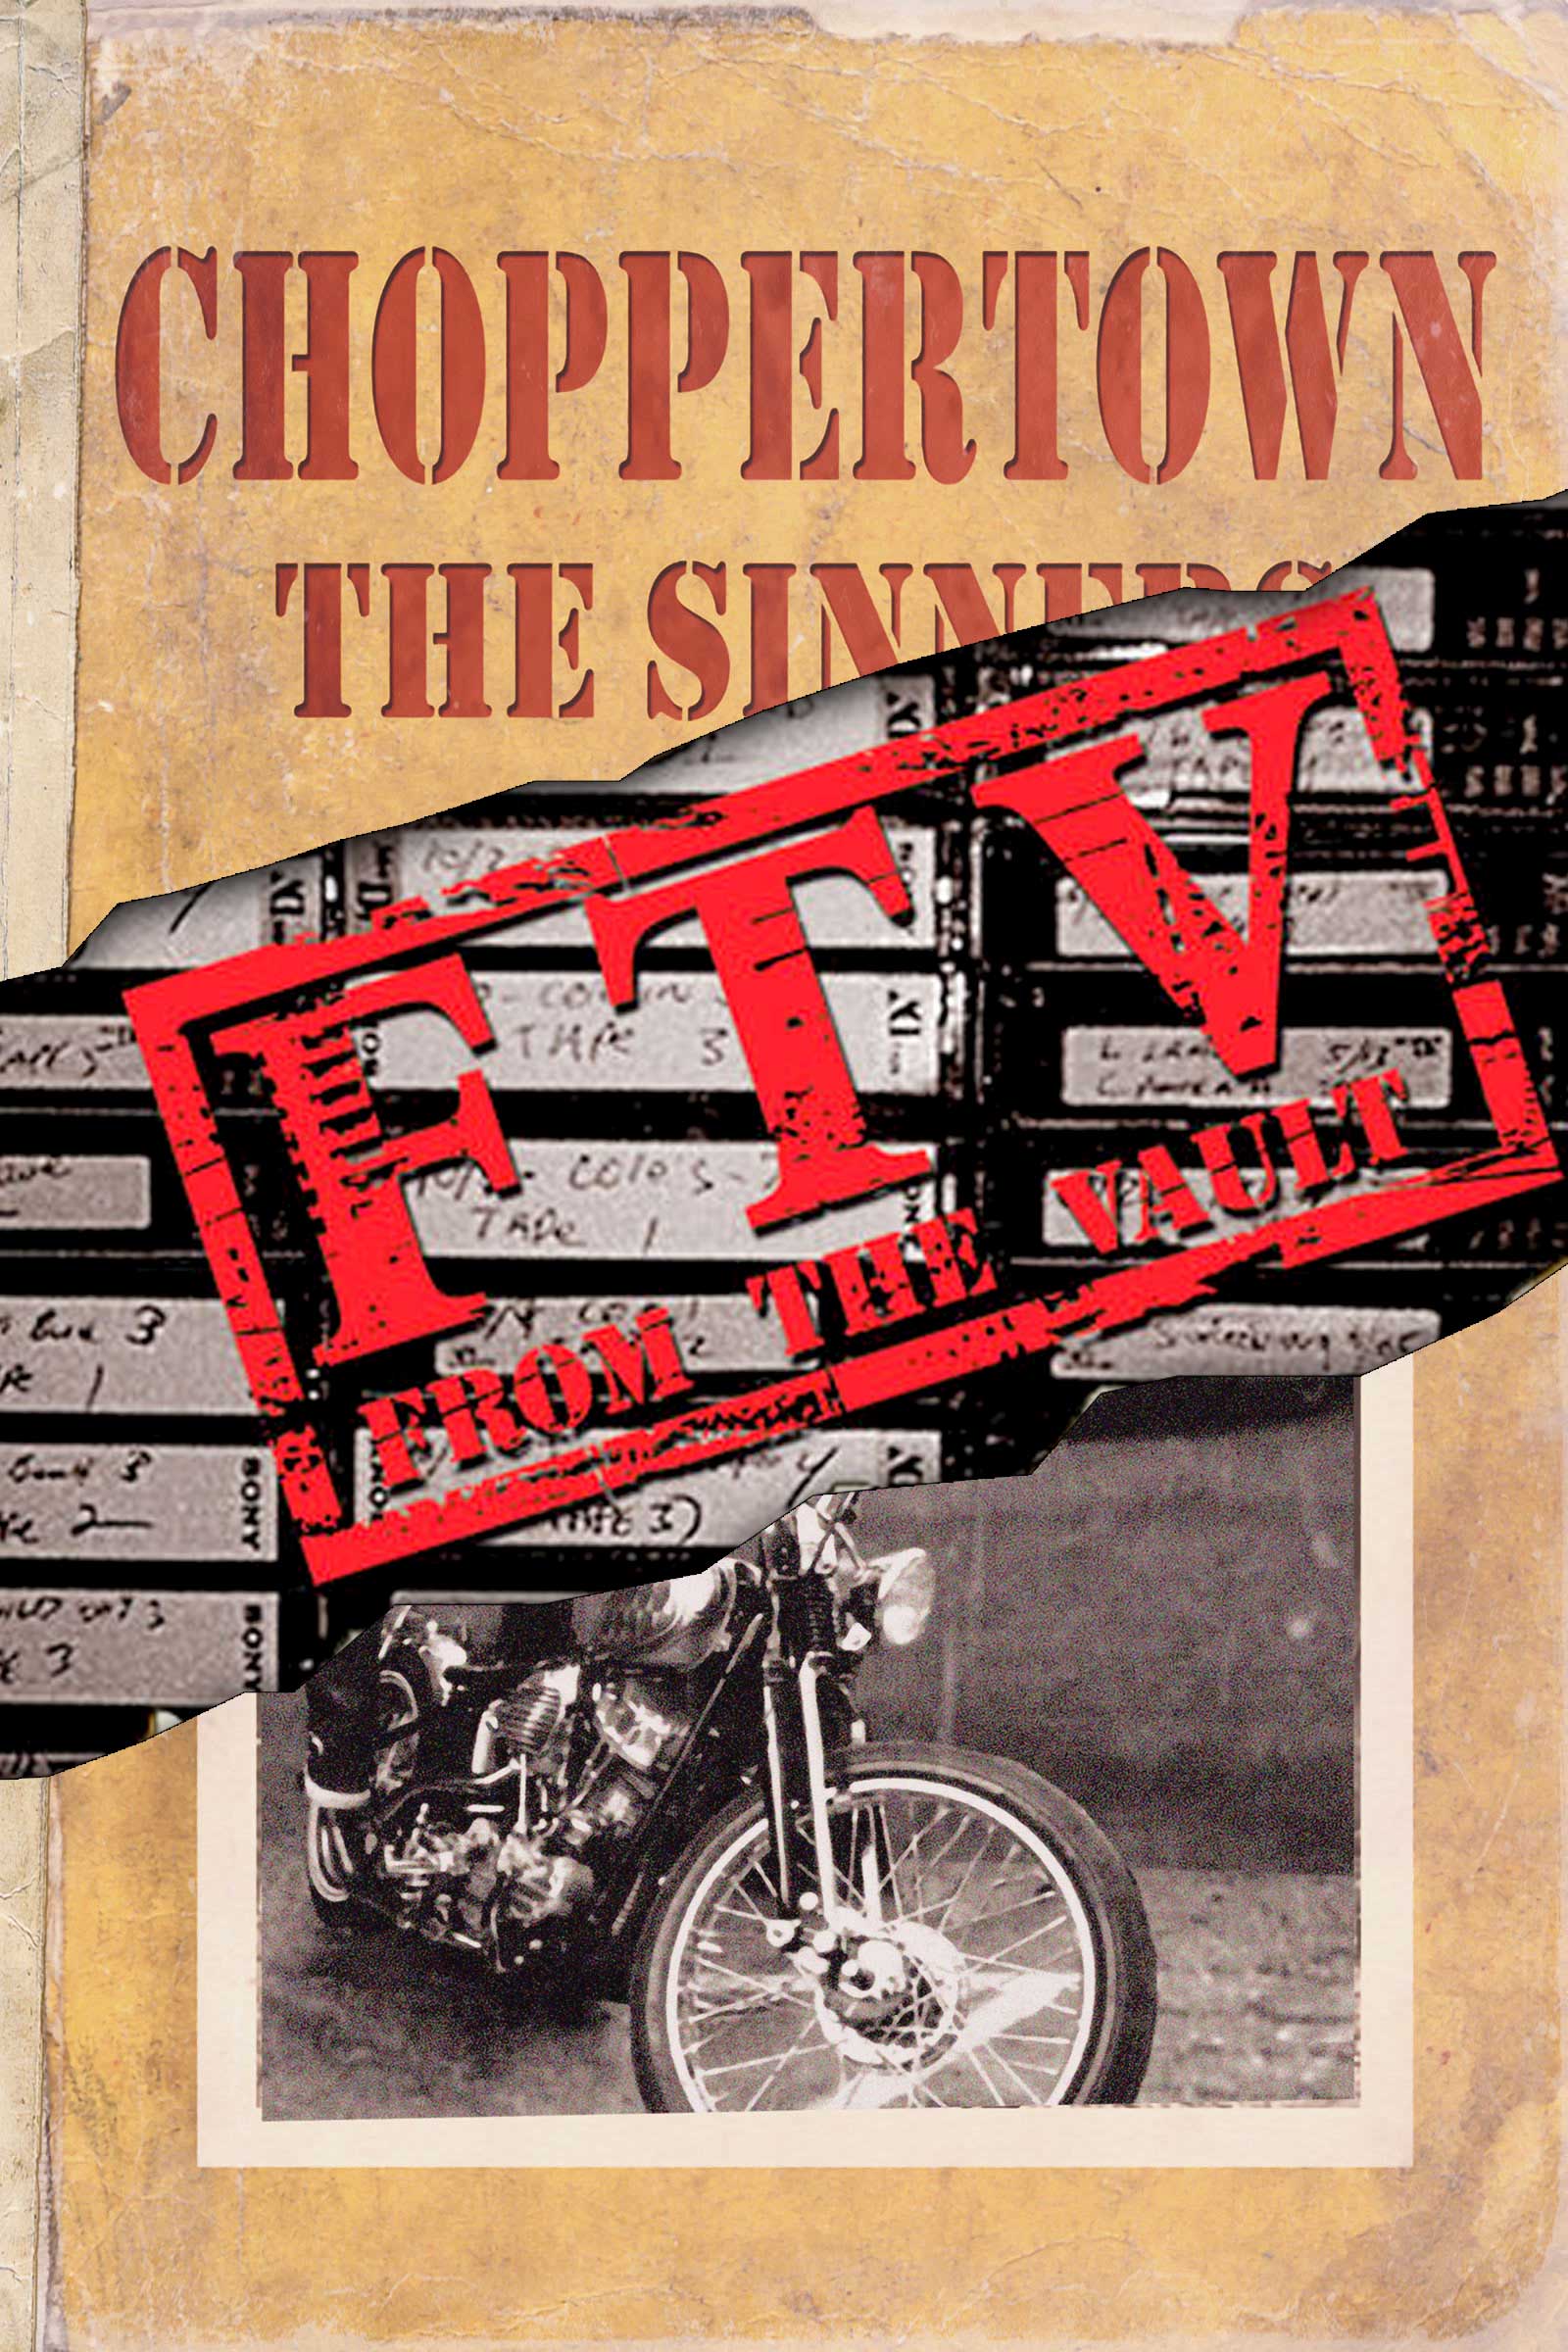 Where to stream Choppertown From the Vault